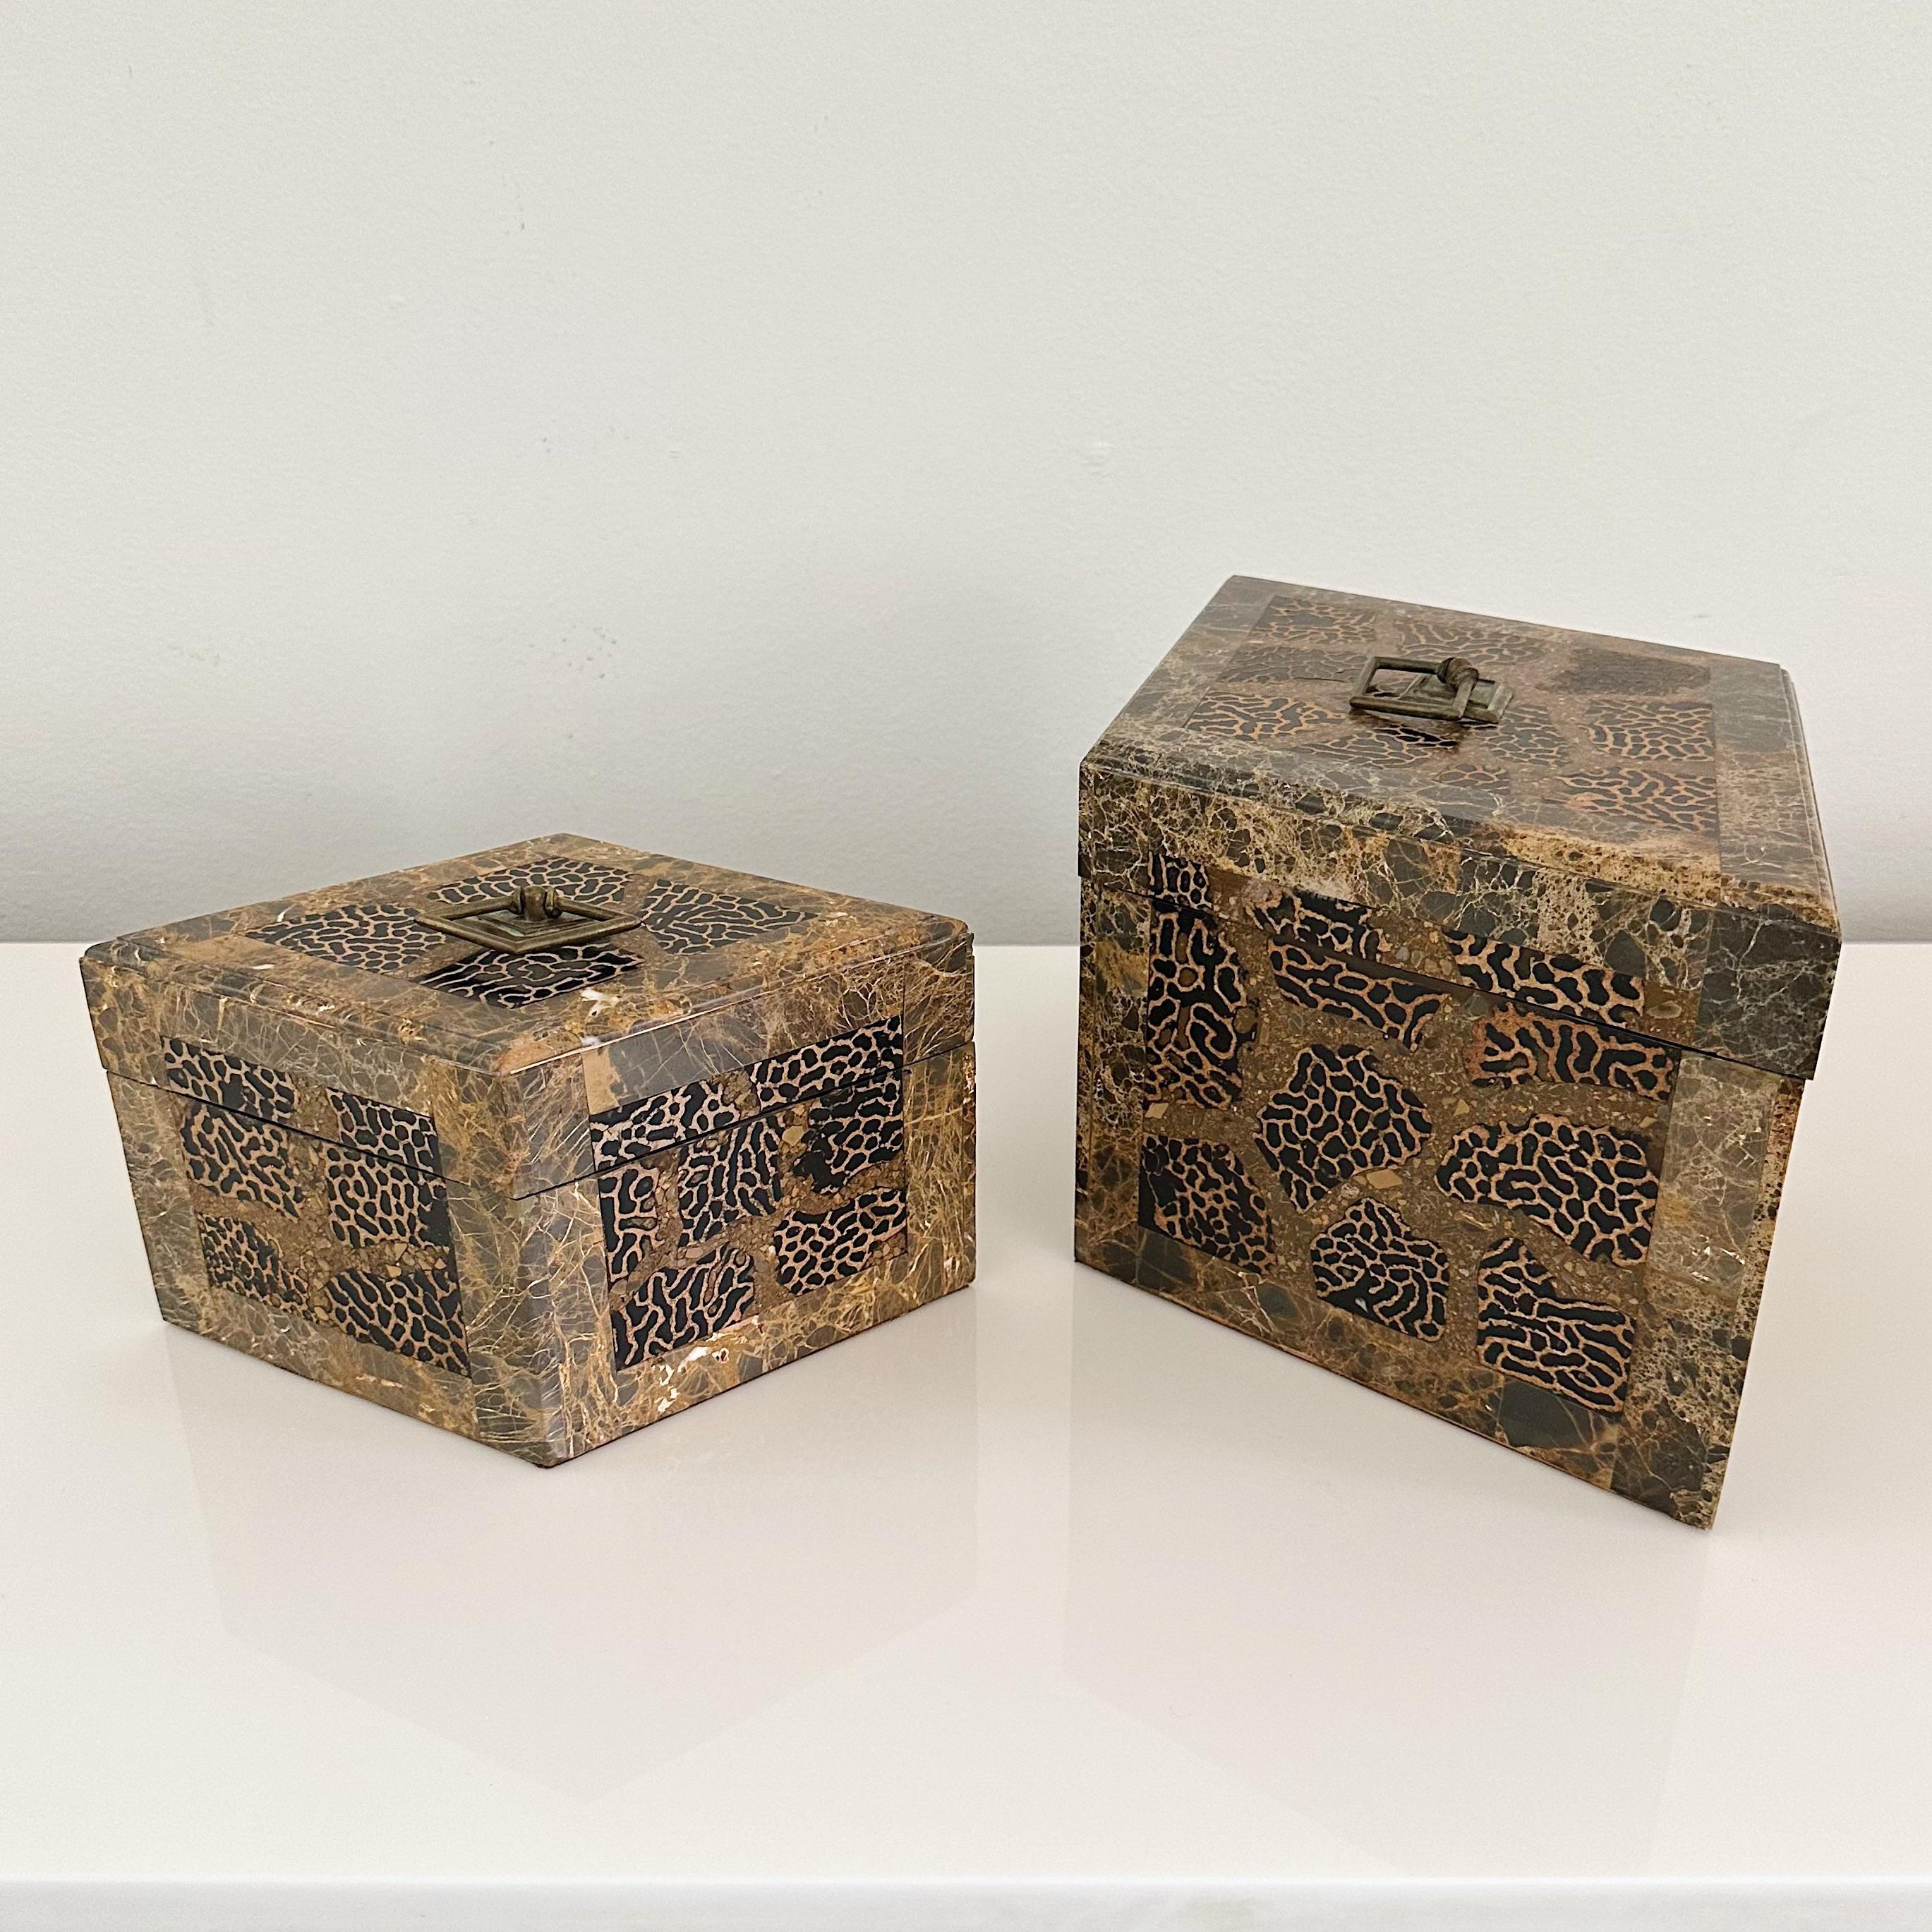 Maitland Smith pair of captivating duo of animal print design marble and tessellated lidded nesting boxes. This exquisite set comprises one larger box and one smaller box.

Each box is adorned with elegant brass handles, providing both